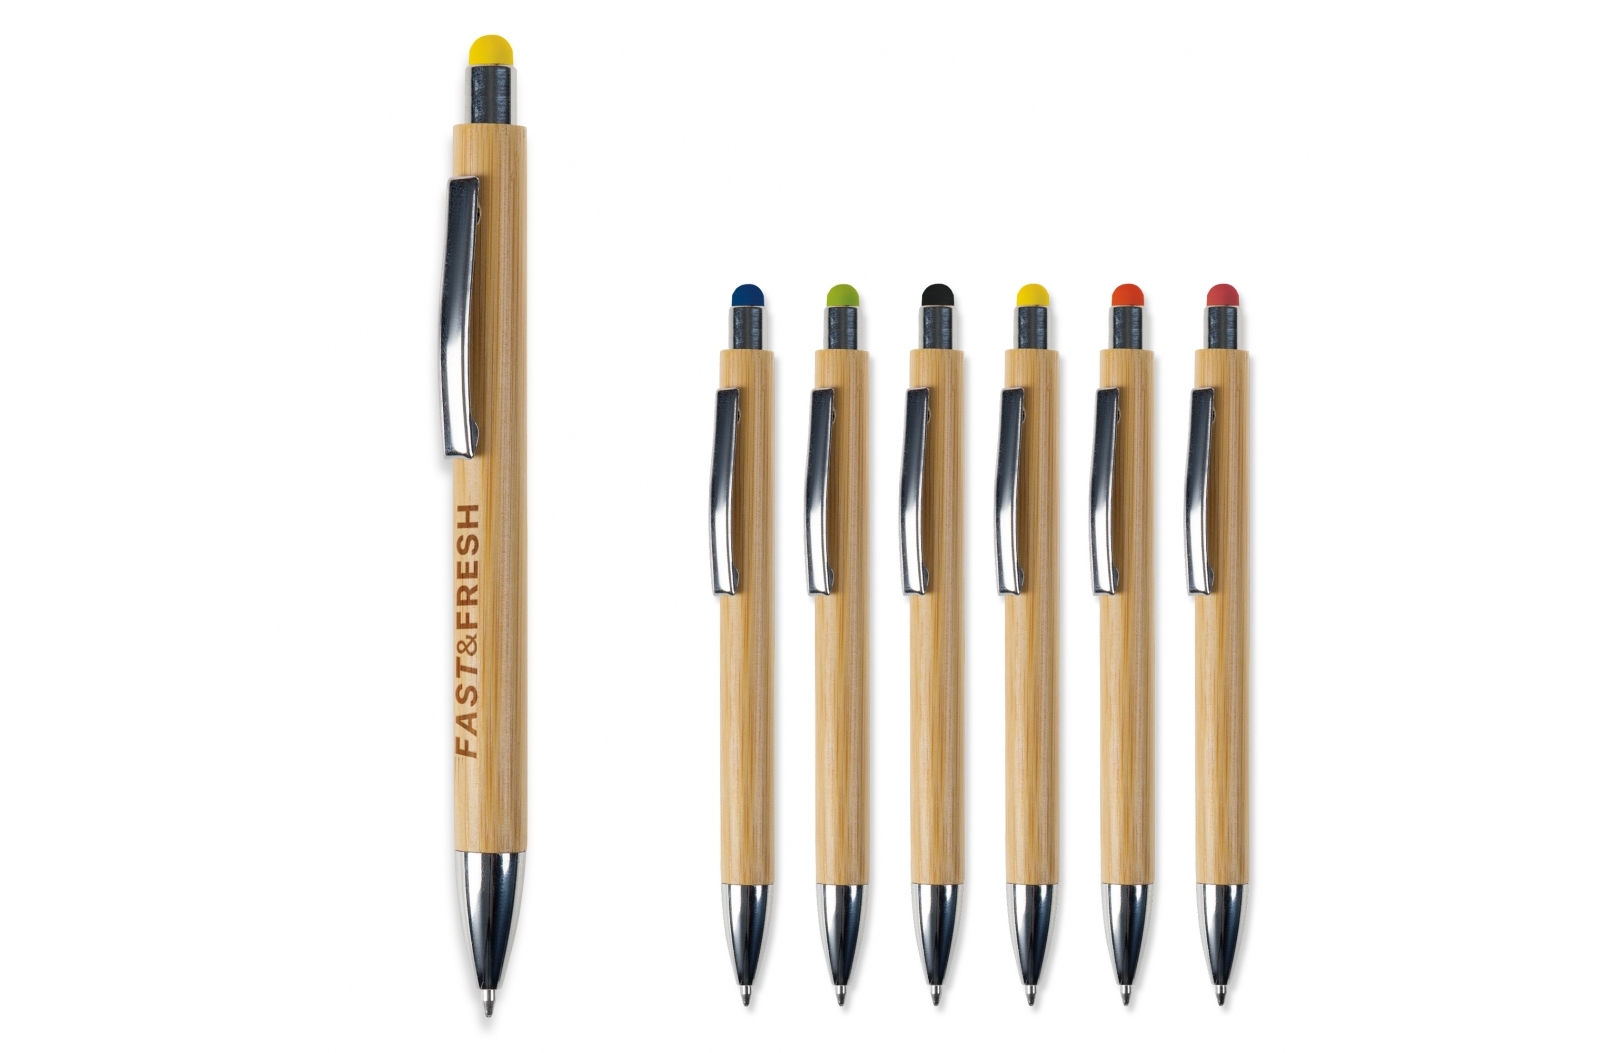 A ballpoint pen made out of bamboo material that features a metalized pusher and a touchscreen stylus - Didsbury